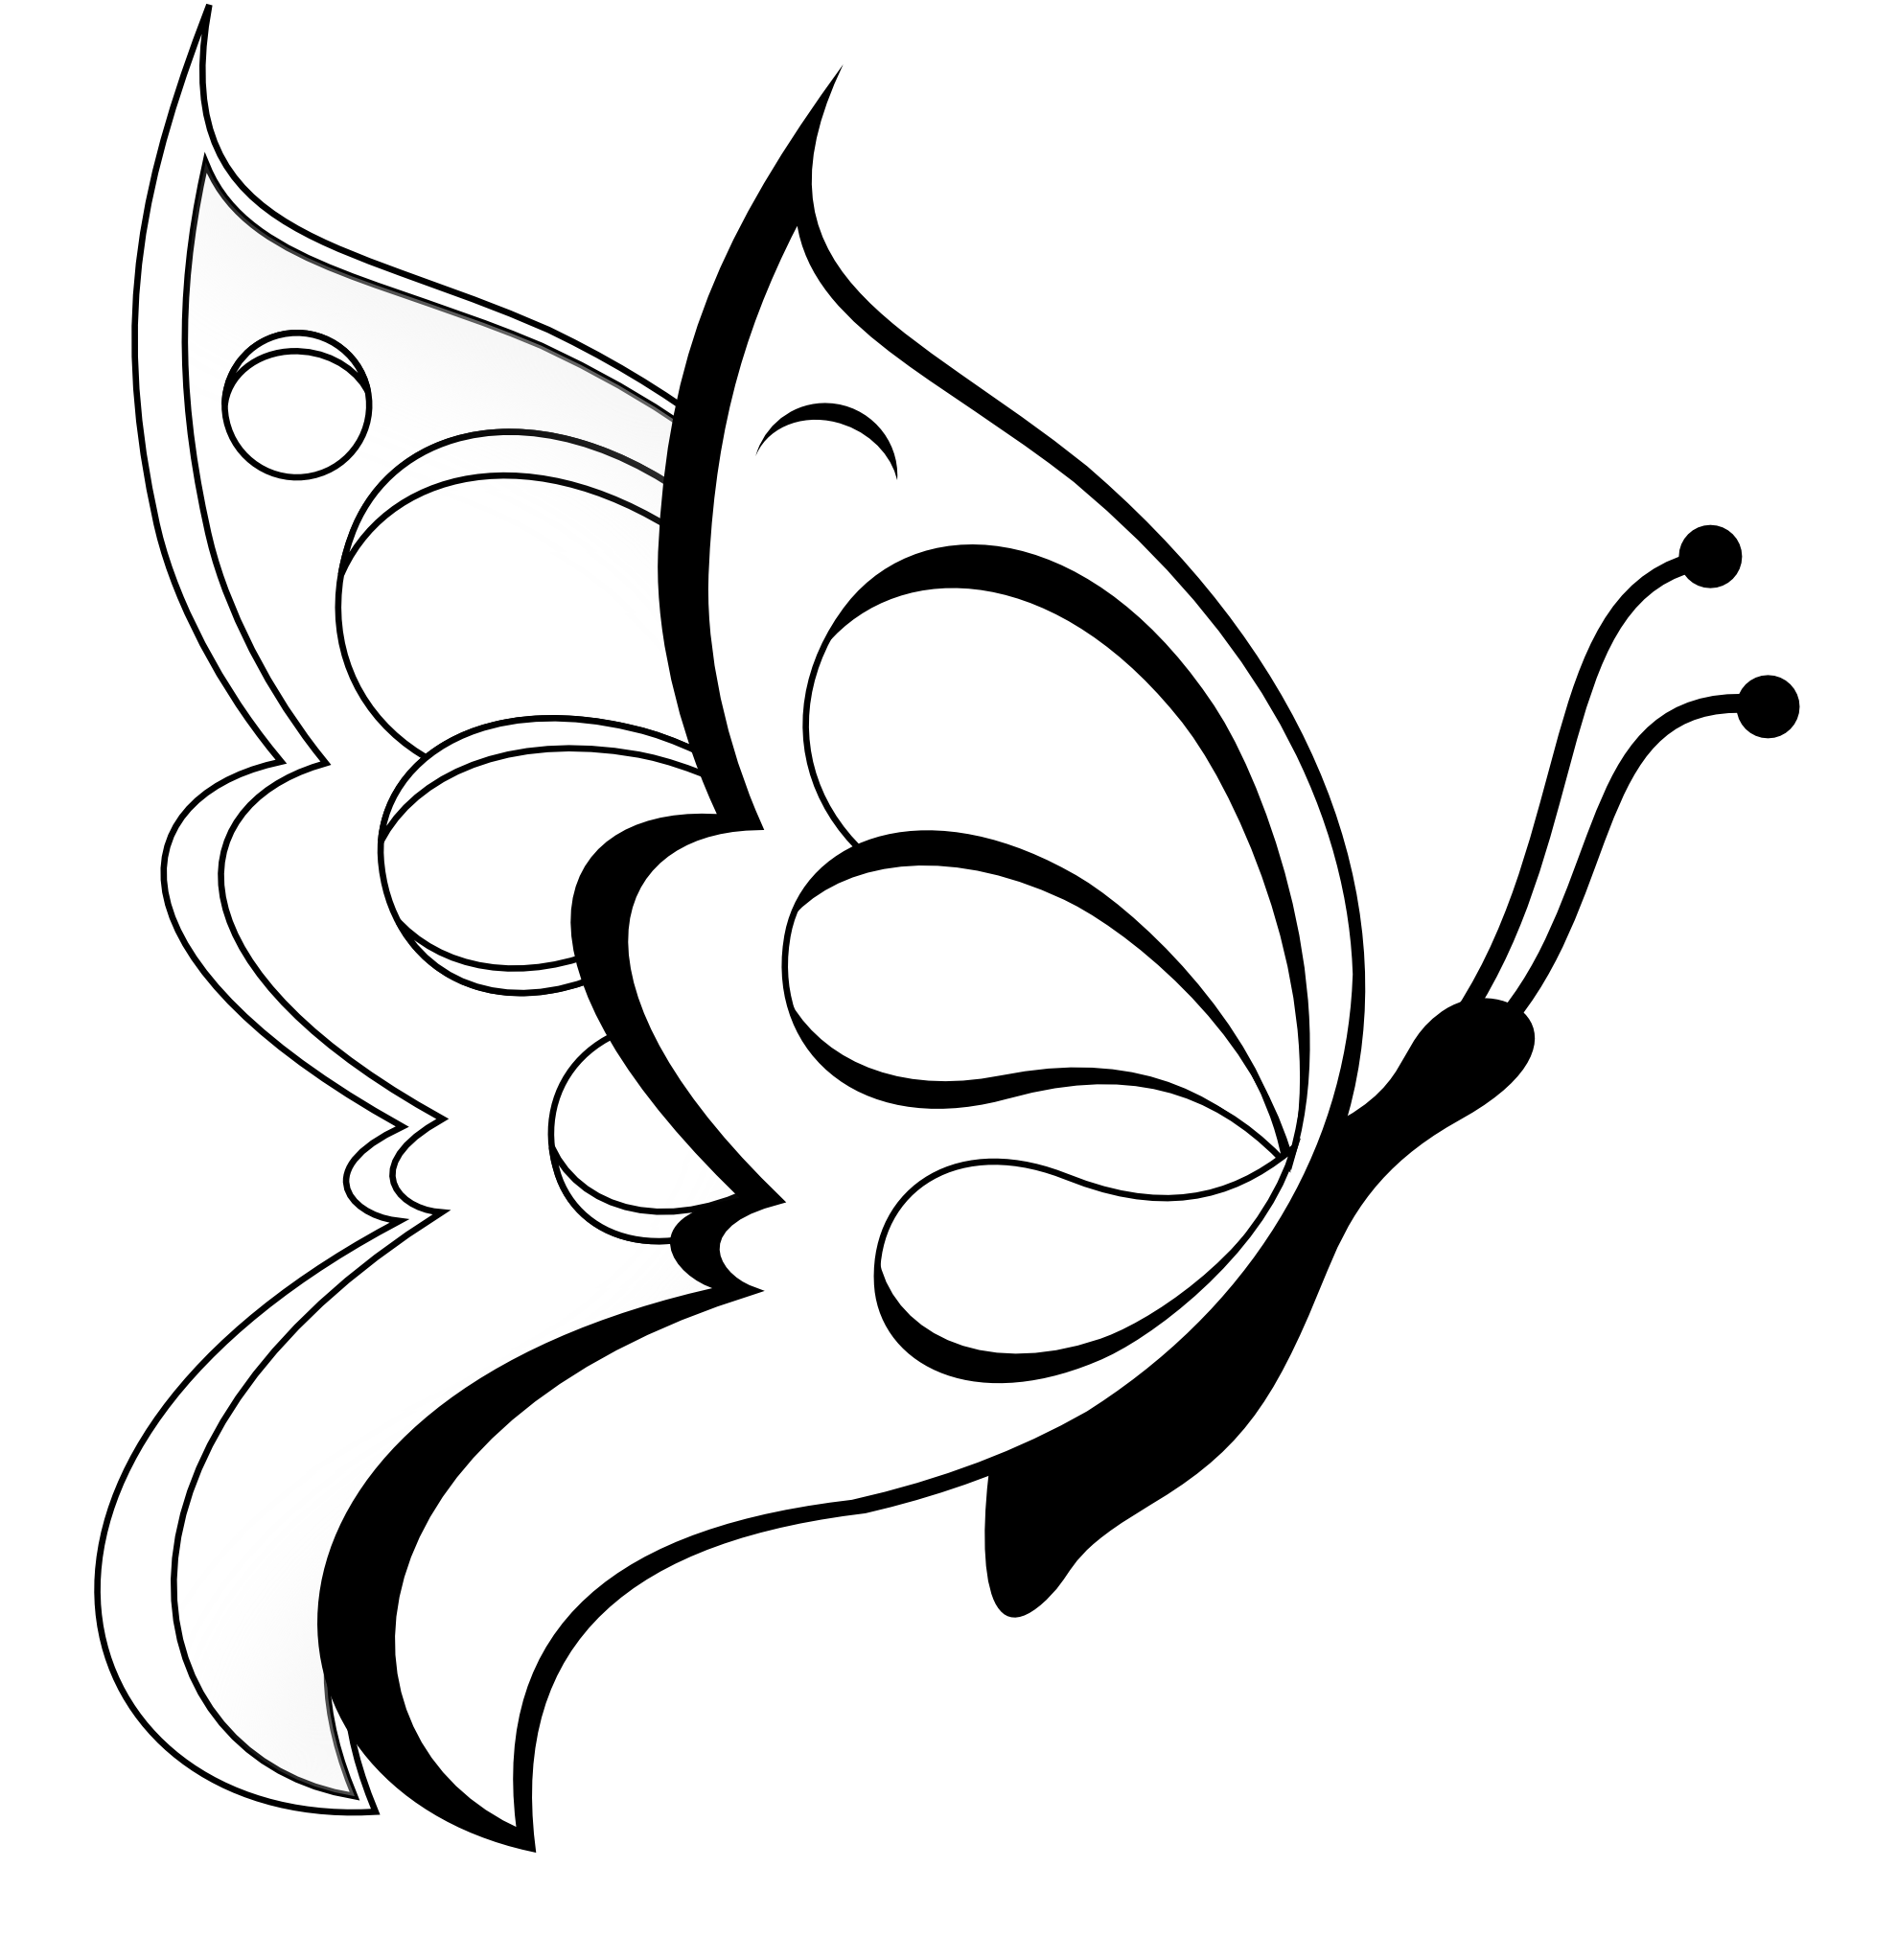 Butterfly clipart butterfly black white line art coloring